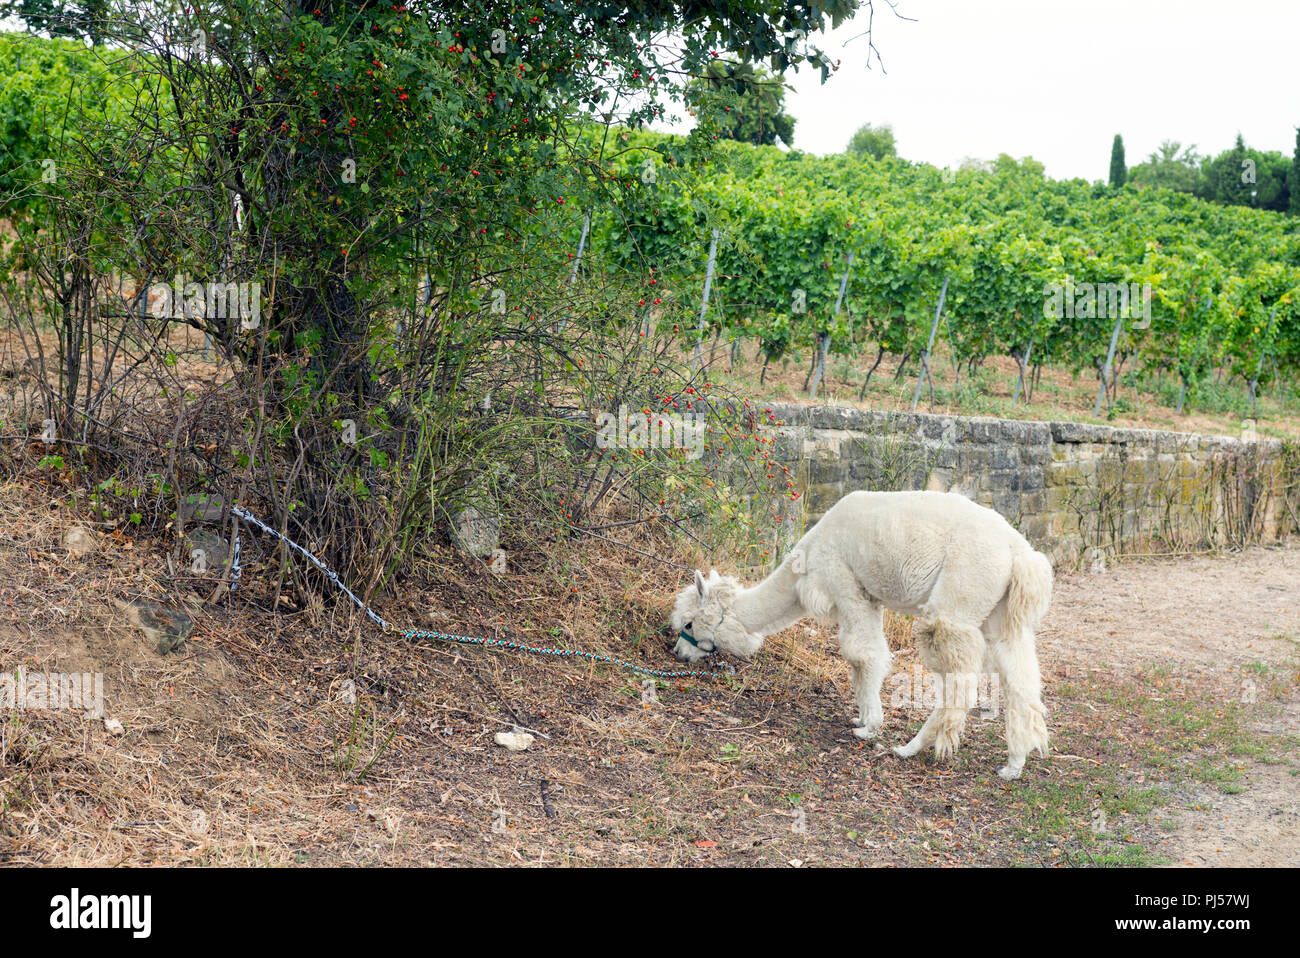 Llama pasturing in the vineyards near Bad Duerkheim, Rhineland-Palatinate, Germany. Llama hiking tours have become a new trend in local tourism in the Stock Photo